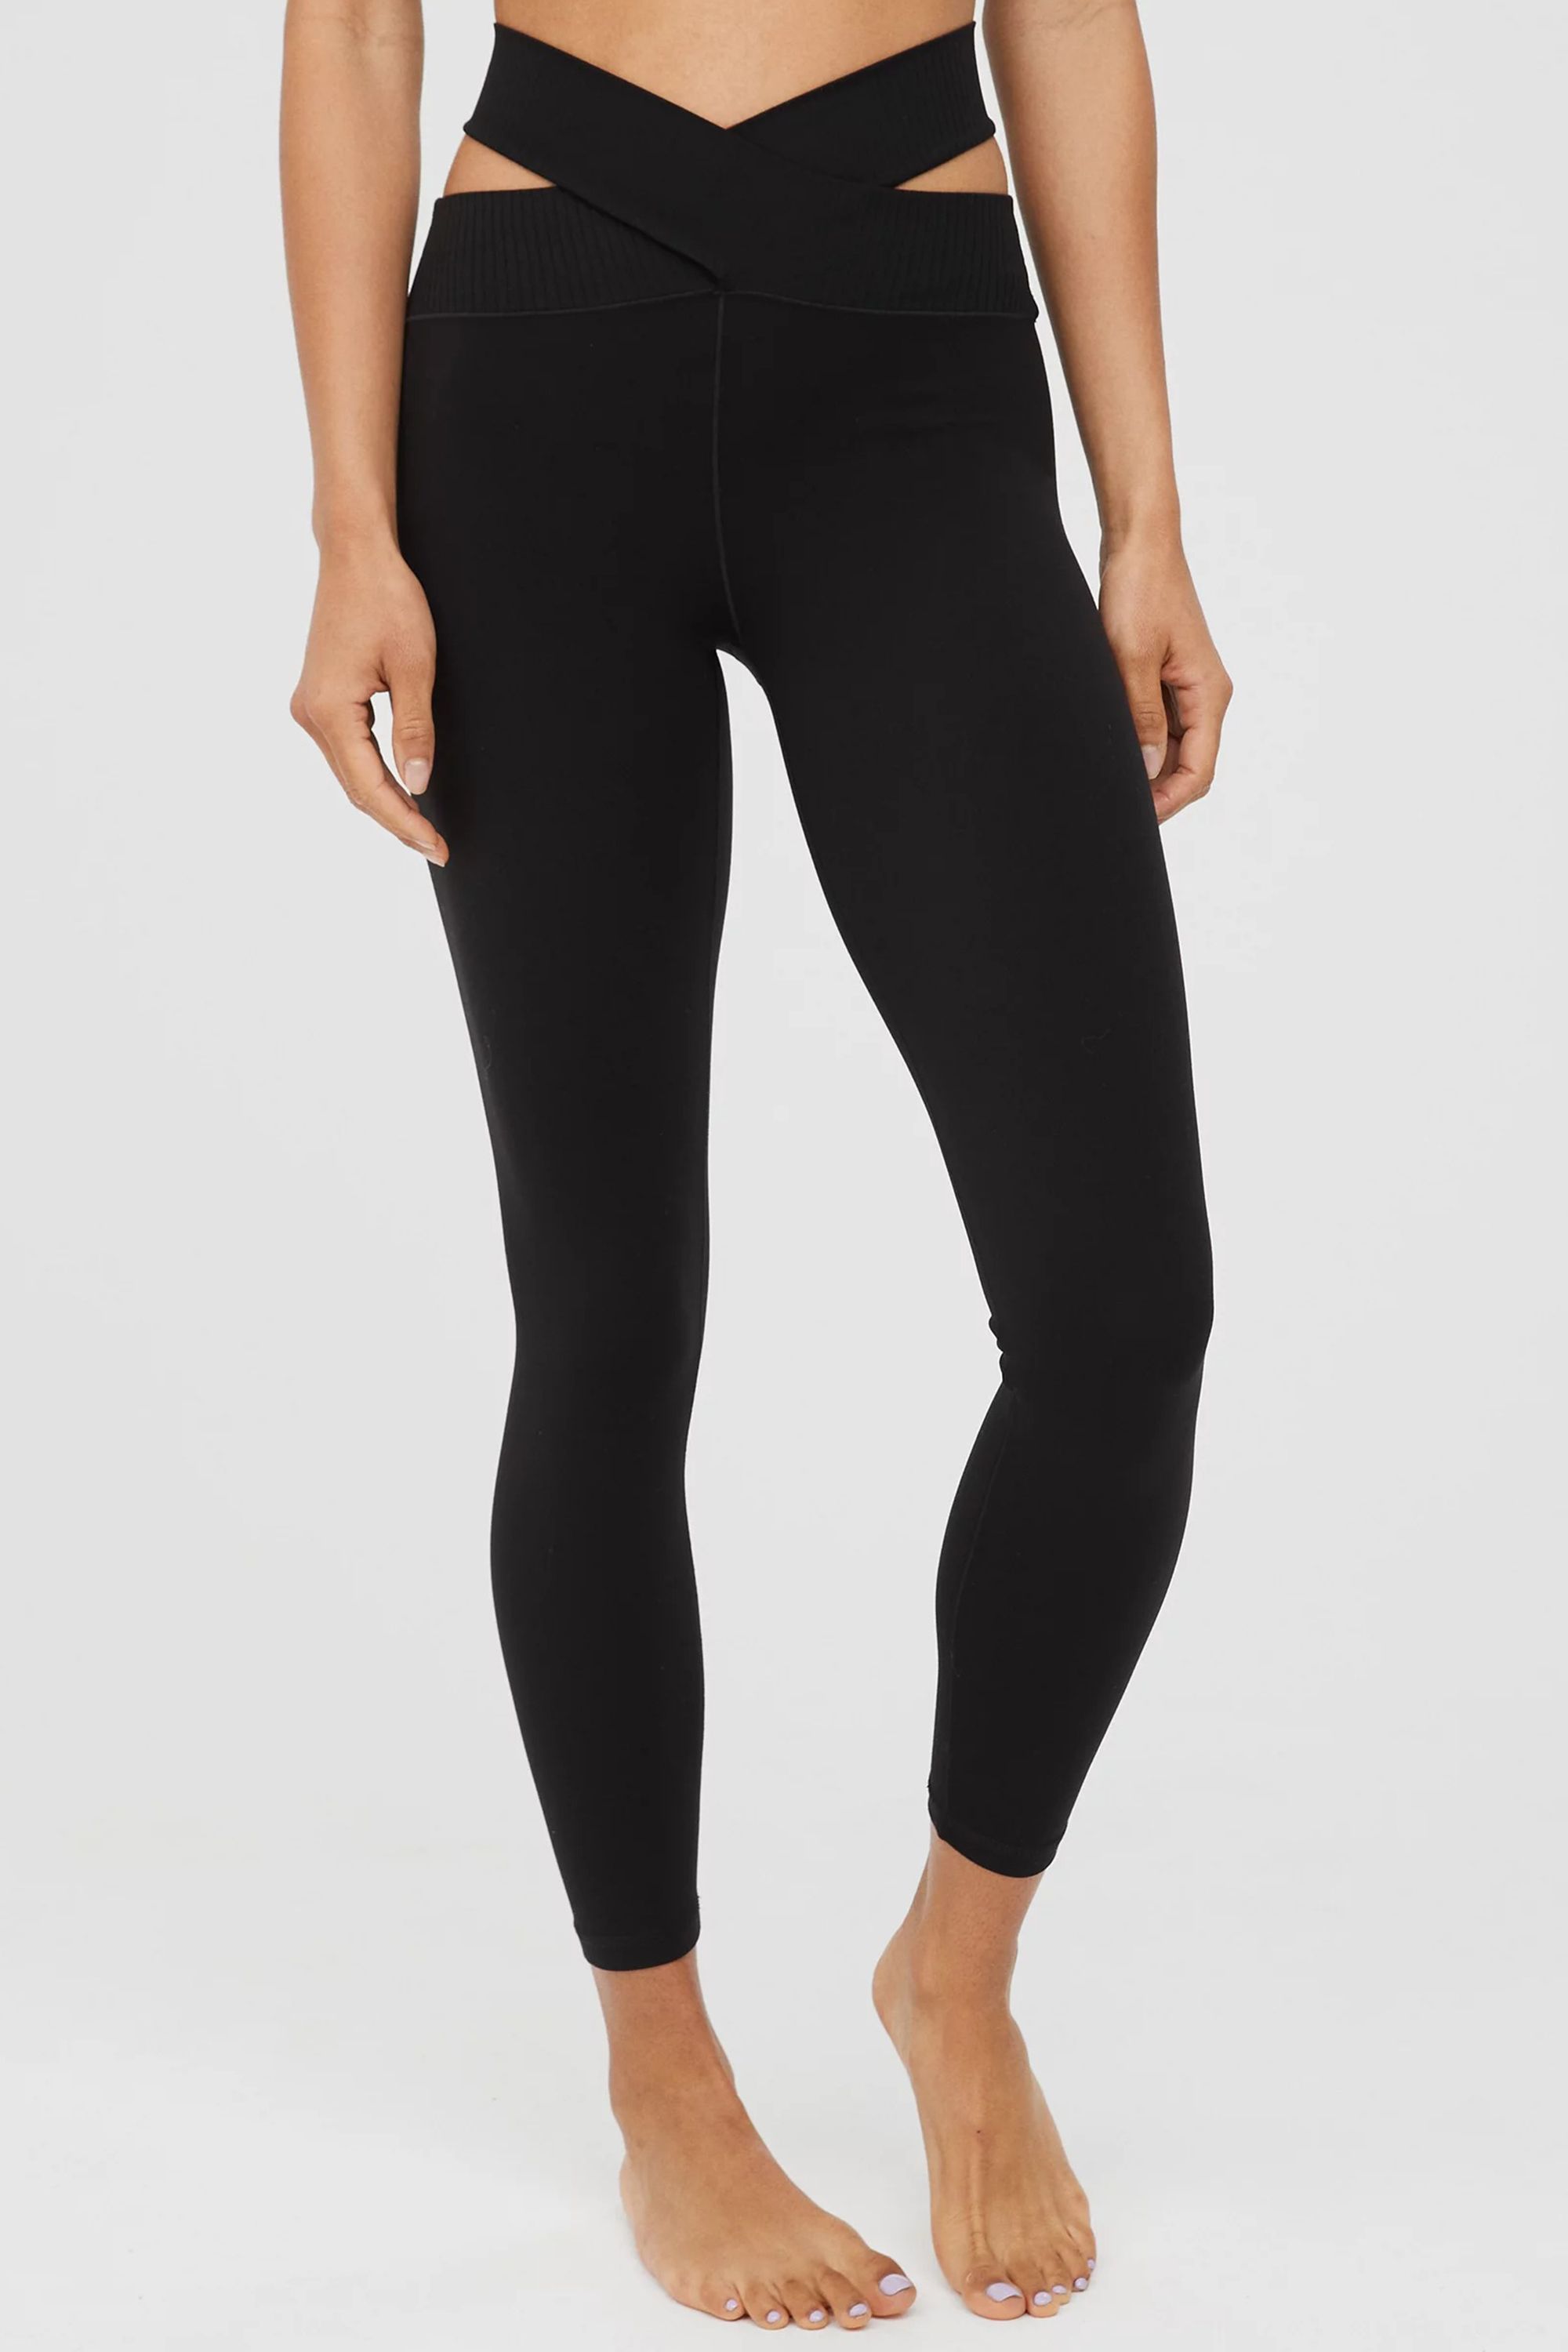 14 Best Workout Leggings of 2023  Reviewed